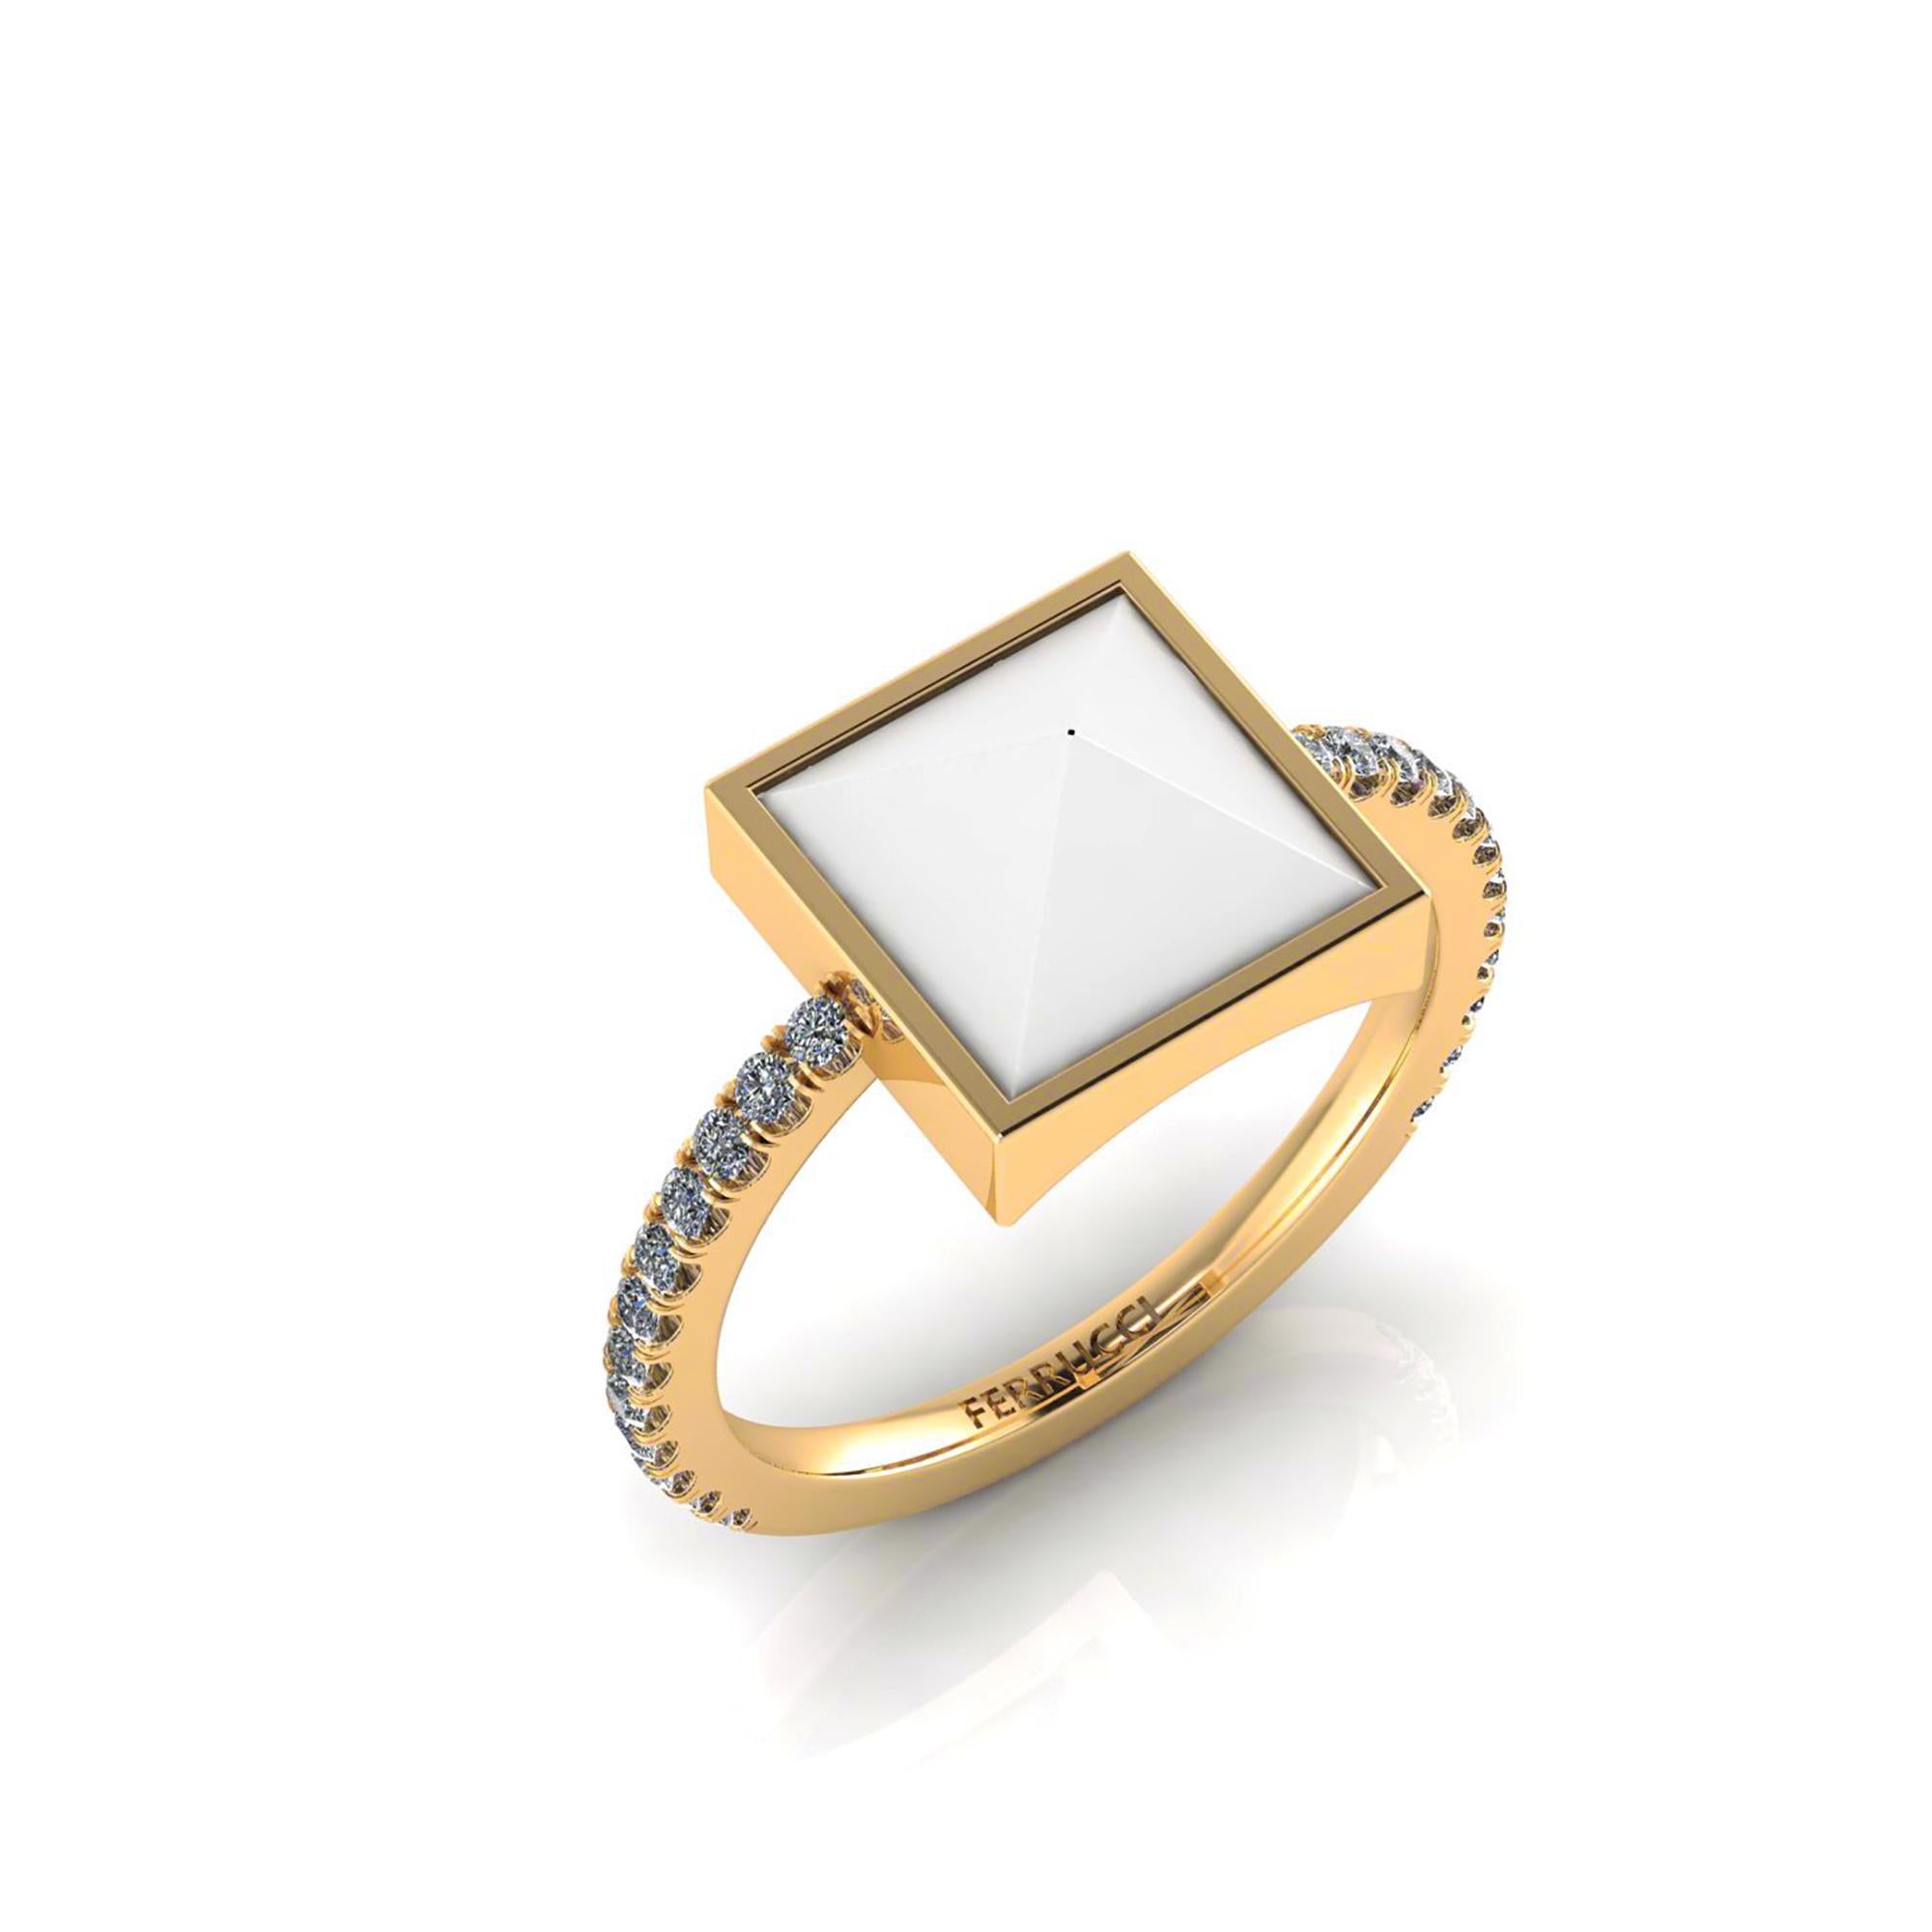 Pyramids collection the white agate solitaire ring in 18k Yellow gold, with White brilliant cut diamonds for an approximate total weight of 0.30 carats, made in New York.

White Agate is credited with harmonizing an individual's feminine and